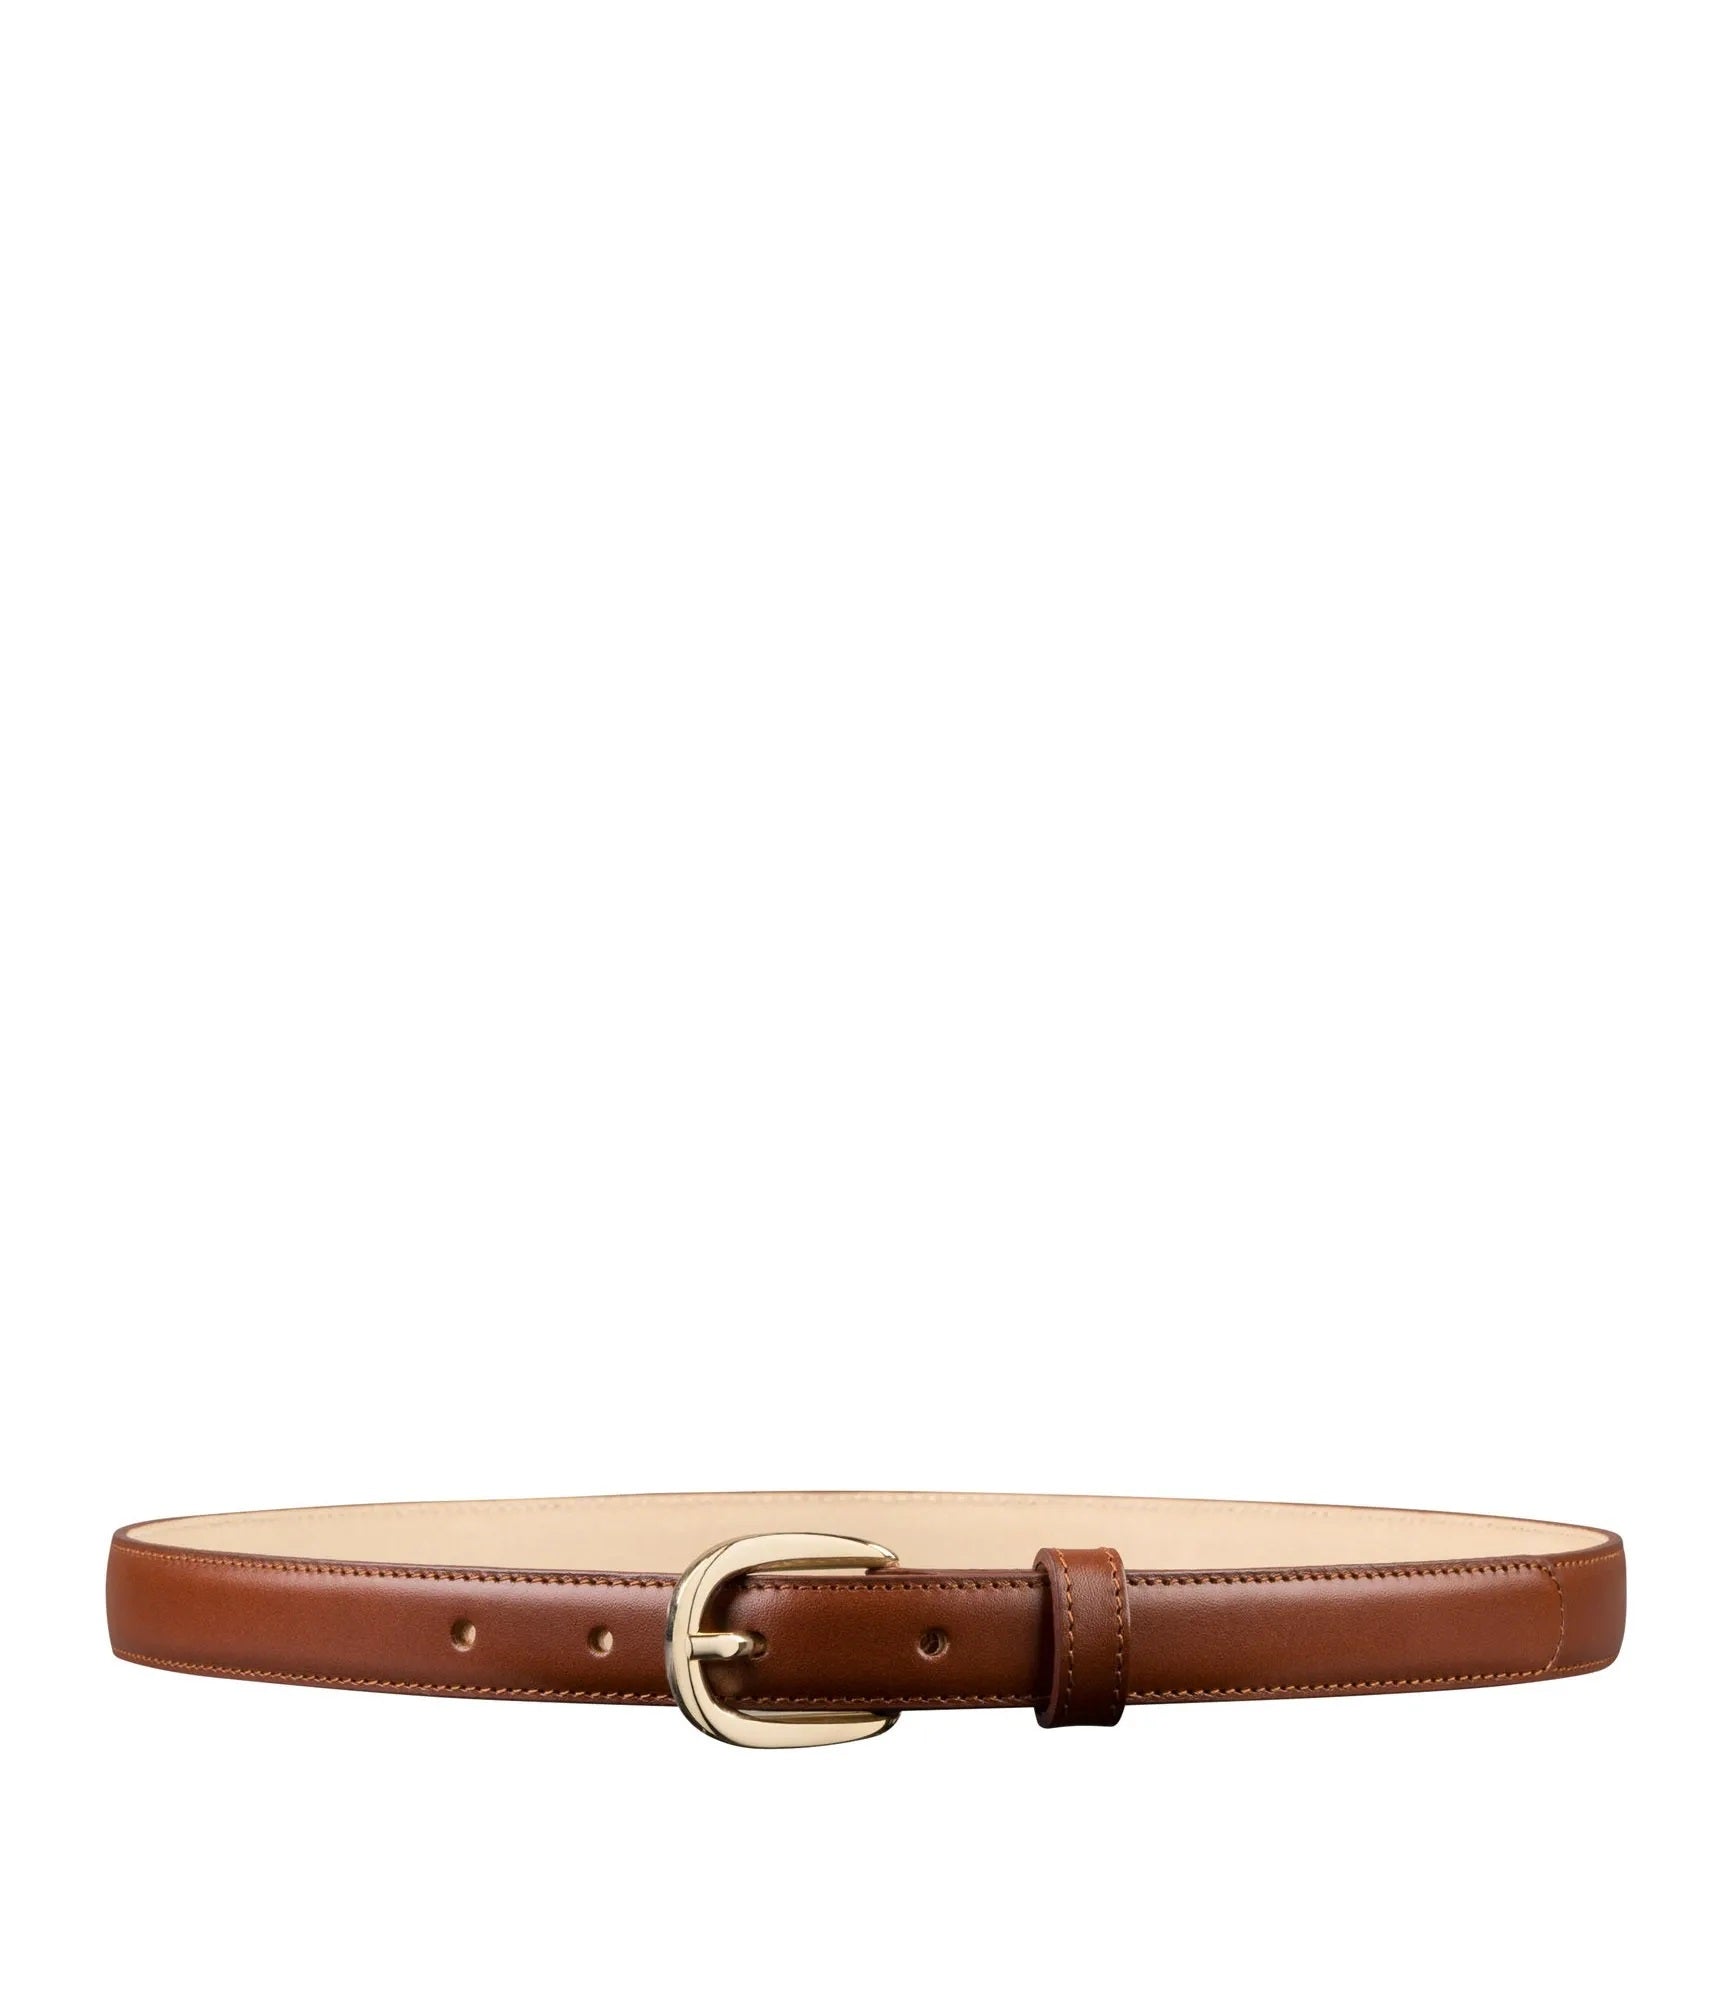 Smooth Leather Dress Belt With Pin Buckle - Chestnut/Black, Belts